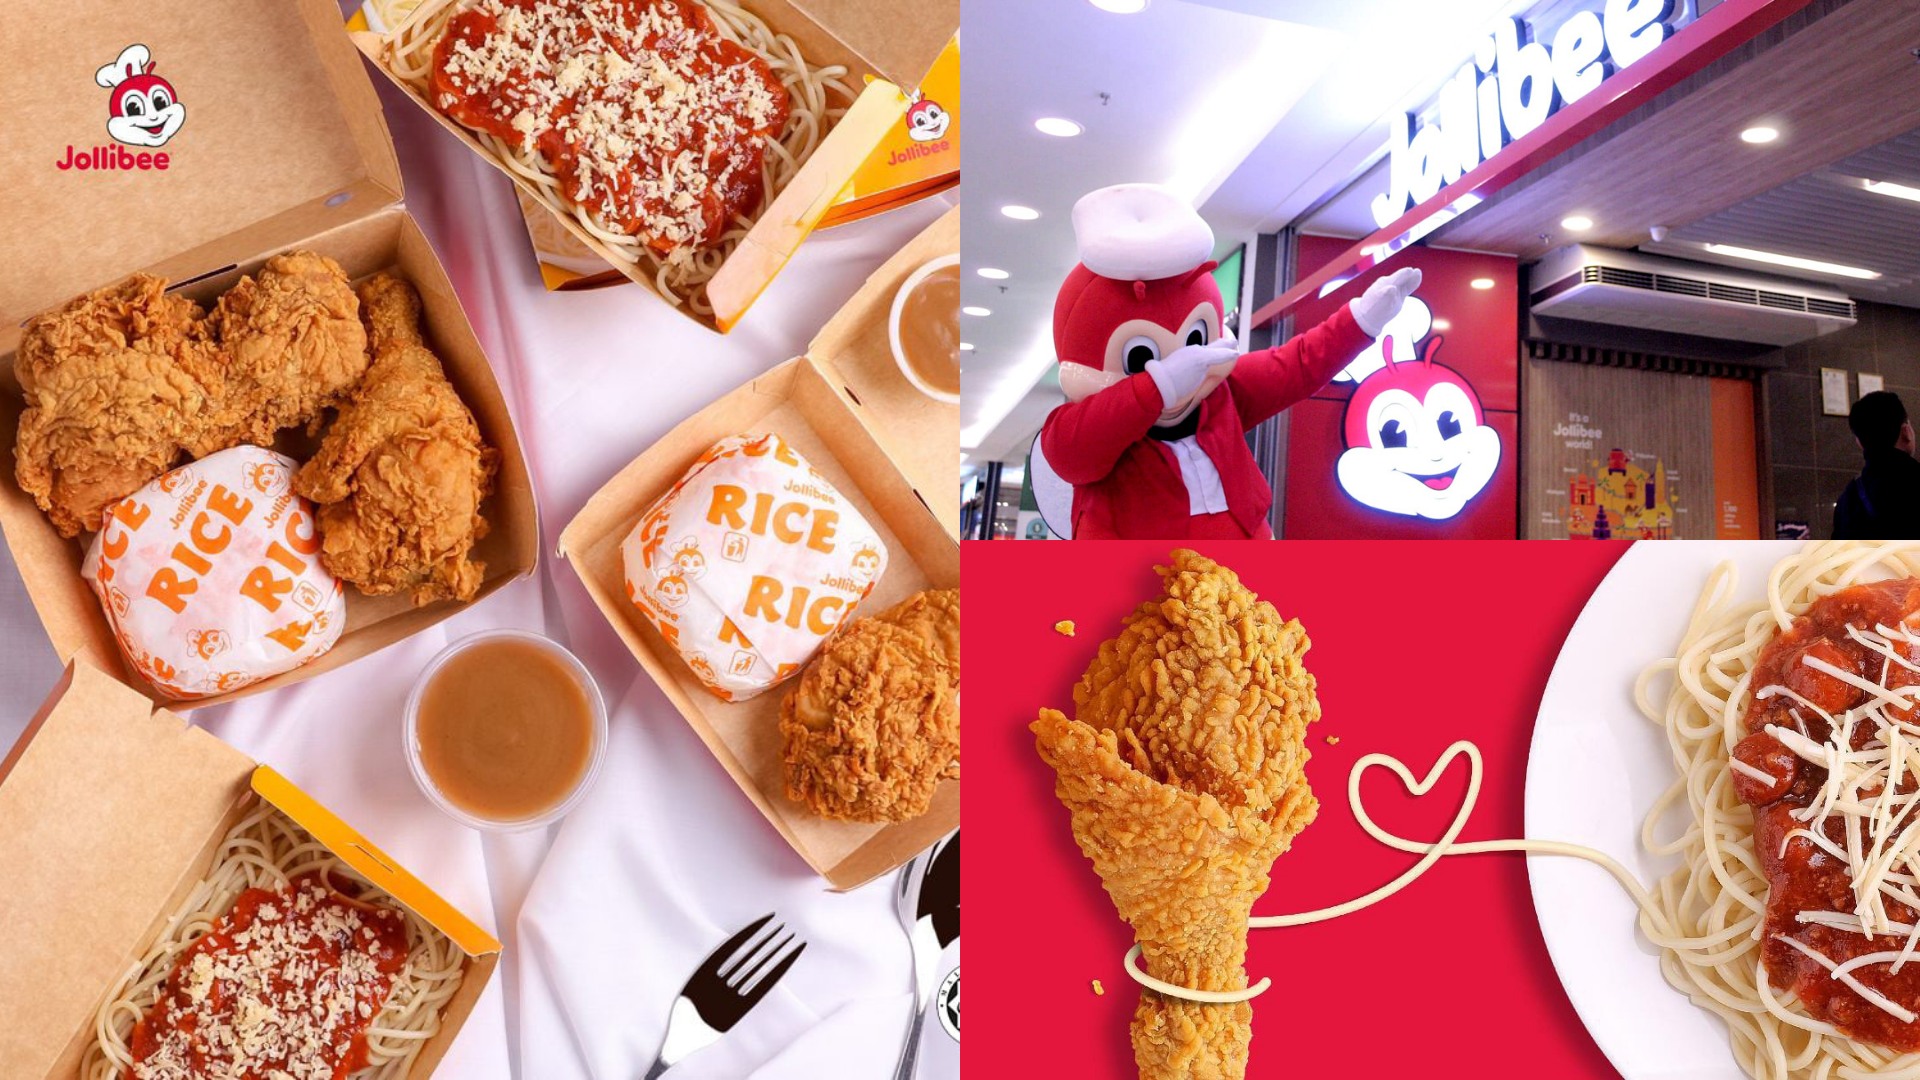 Famous Filipino Fast Food Chain Jollibee To Open 120 Outlets In